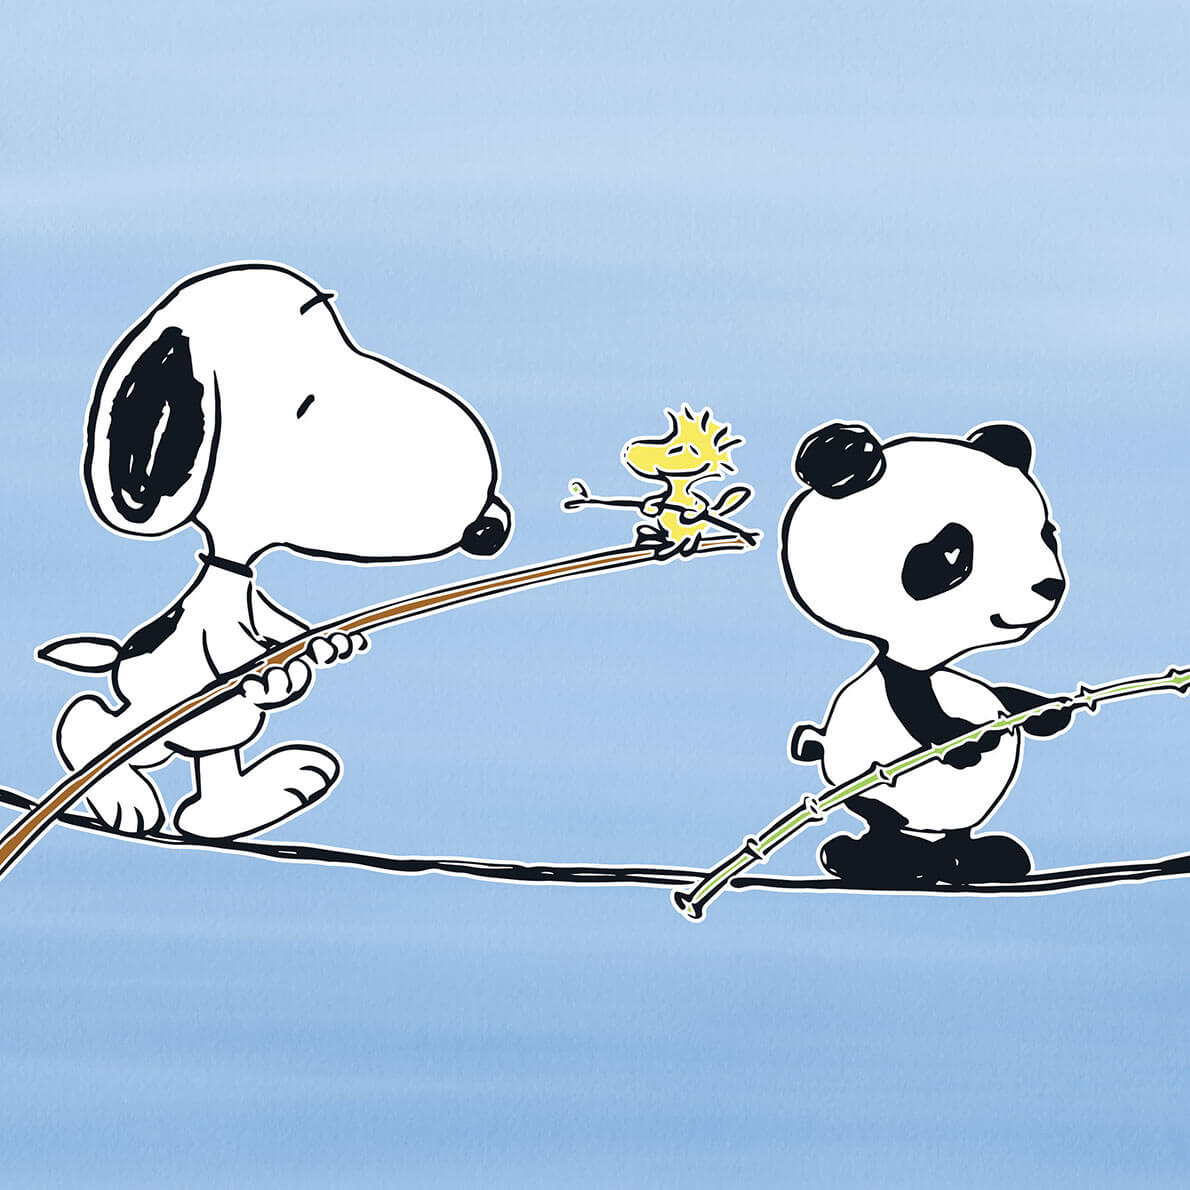 A panda and a black and white dog walking on a thin rope in front of a blue background.